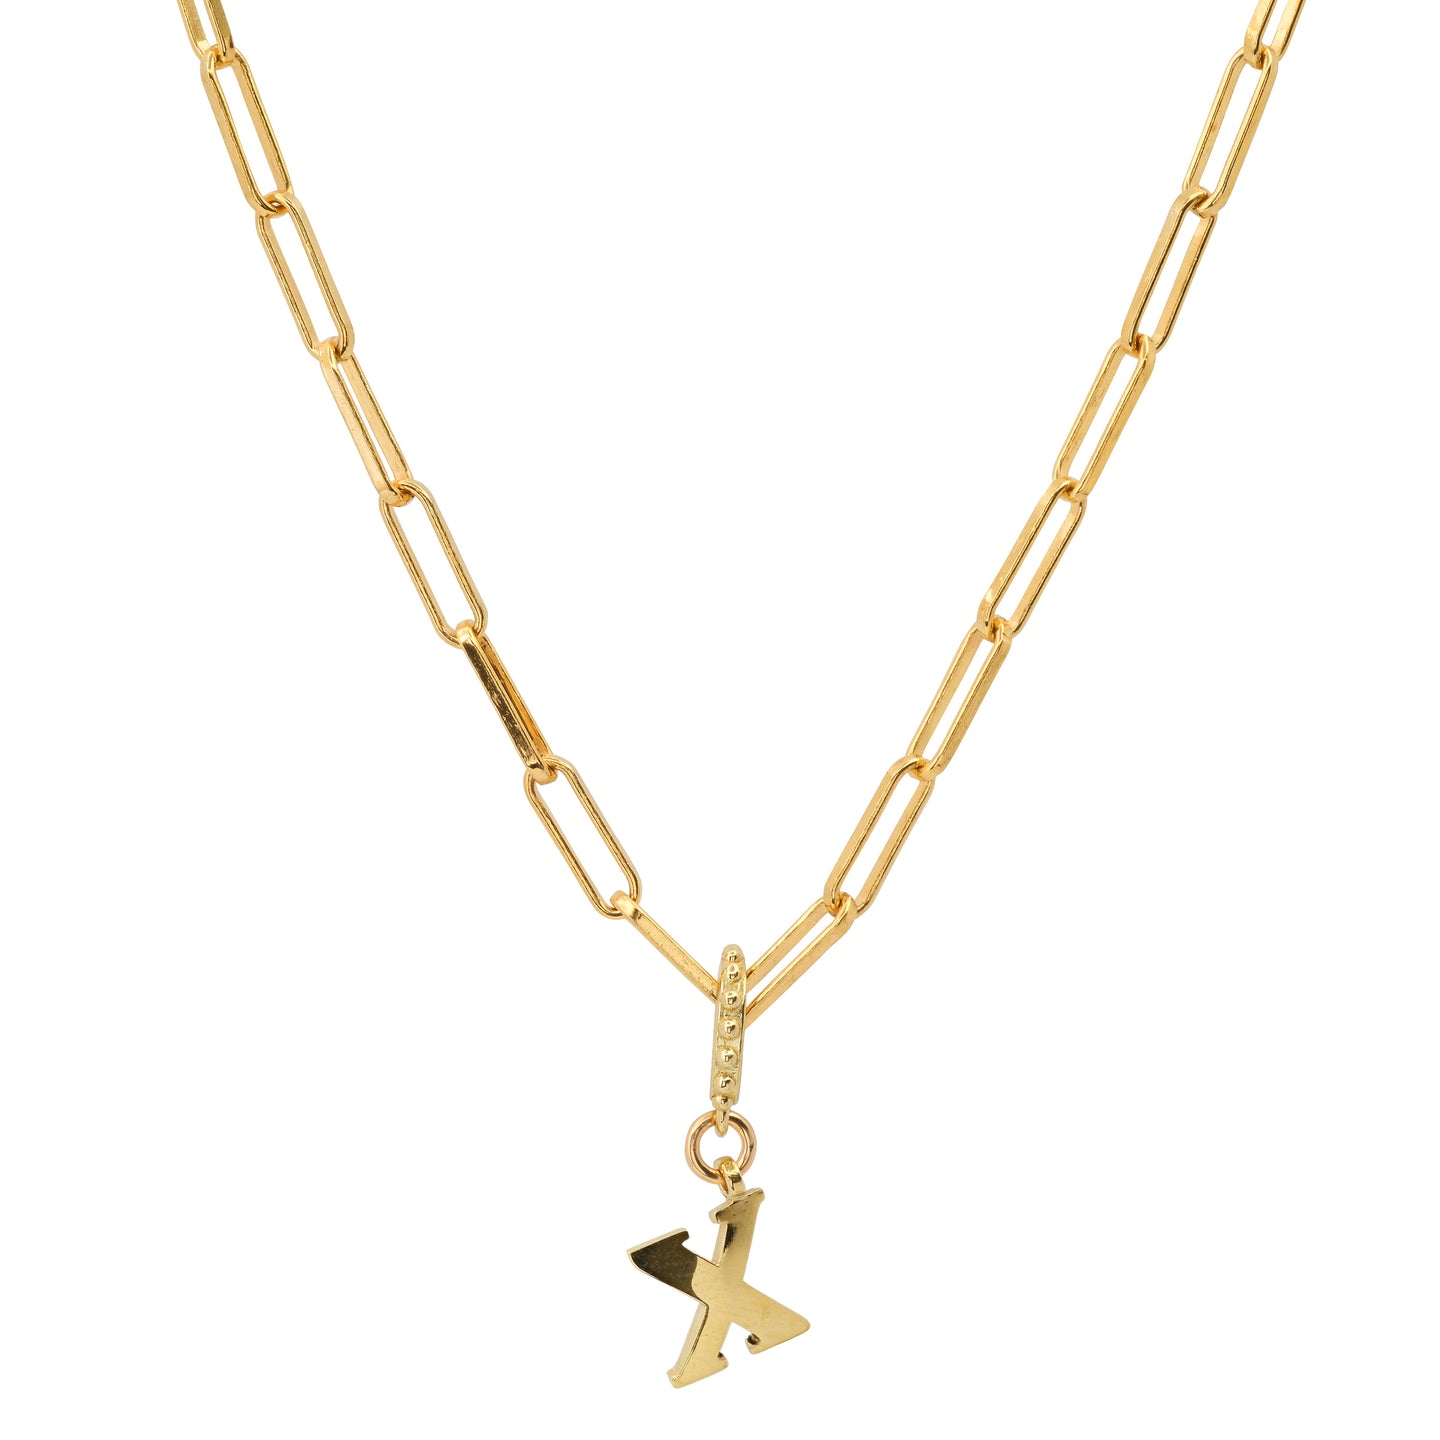 Gold chain with X charm